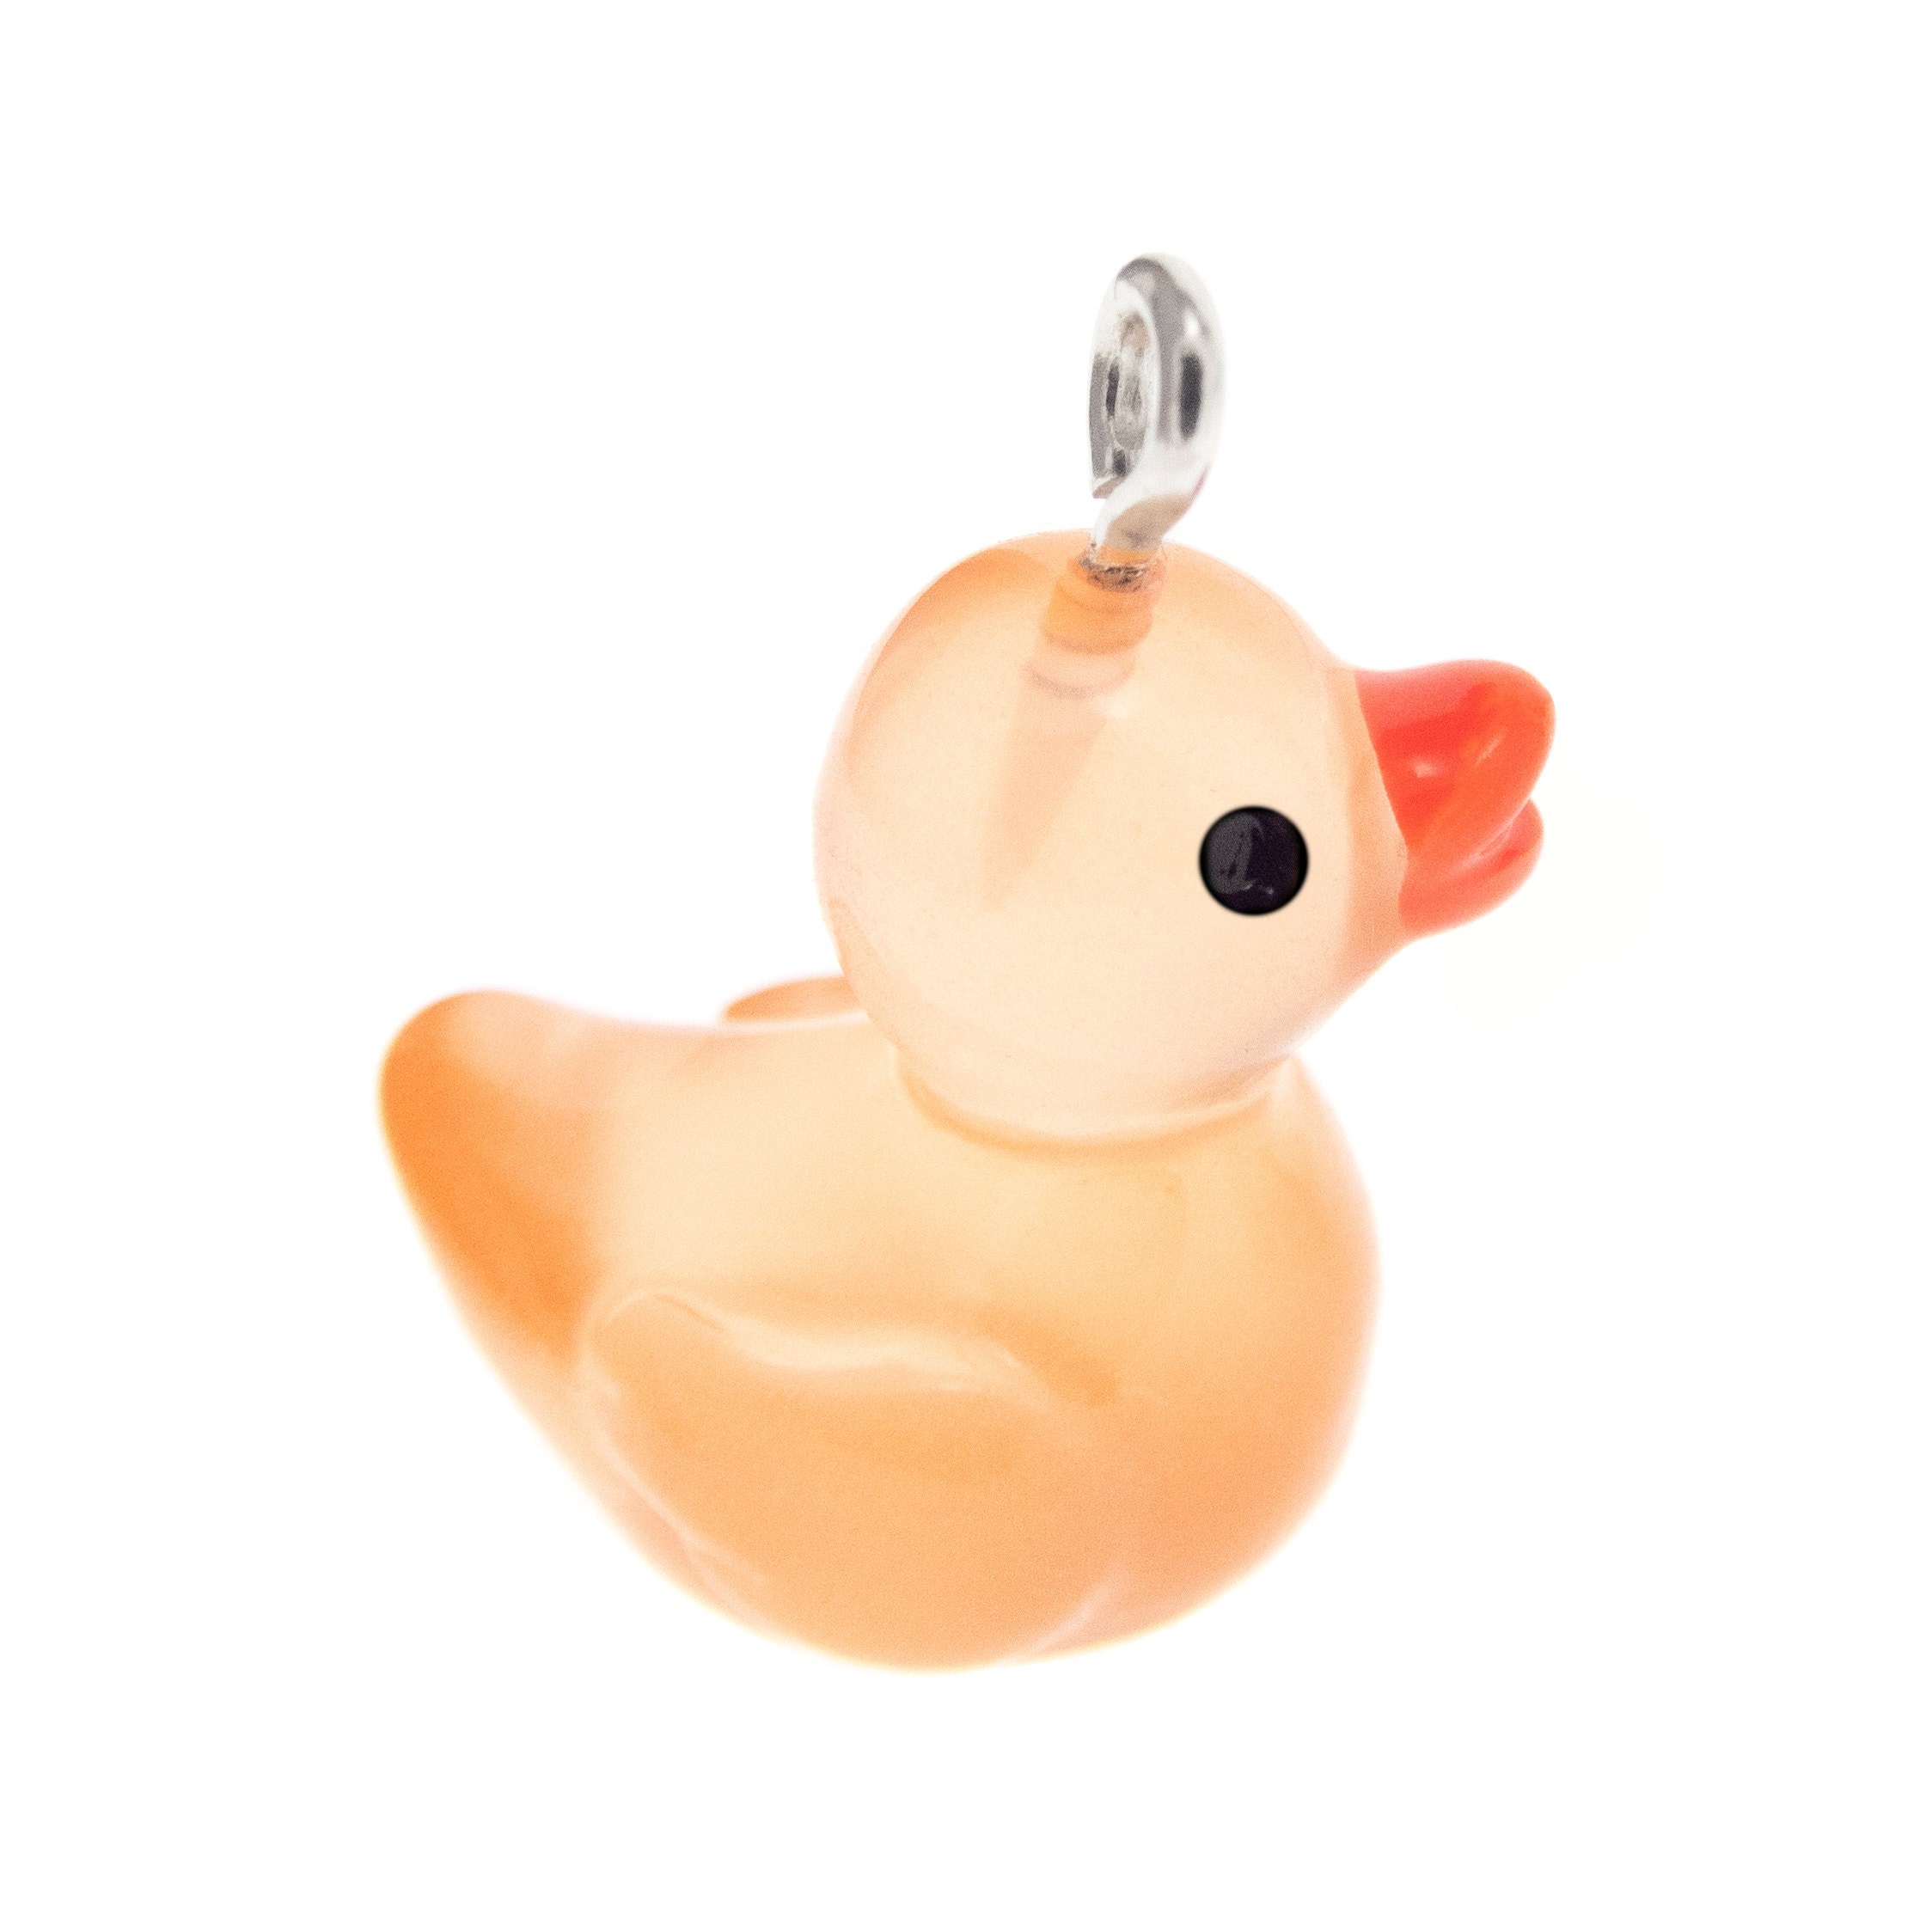 necklace with rubber duck